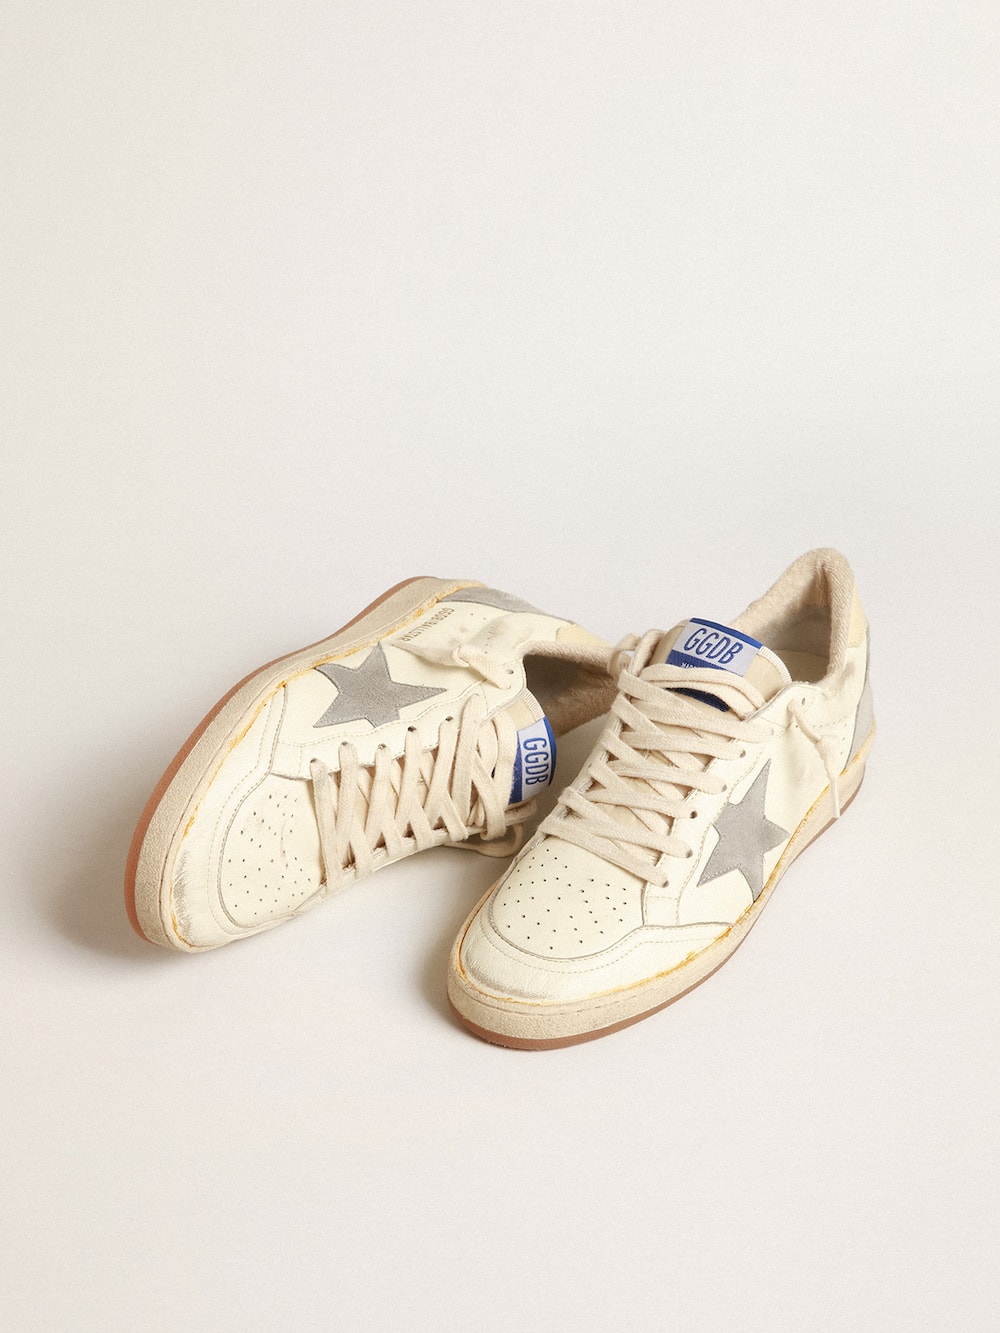 Golden Goose - Ball Star in nappa leather with gray suede star and beige heel tab in 